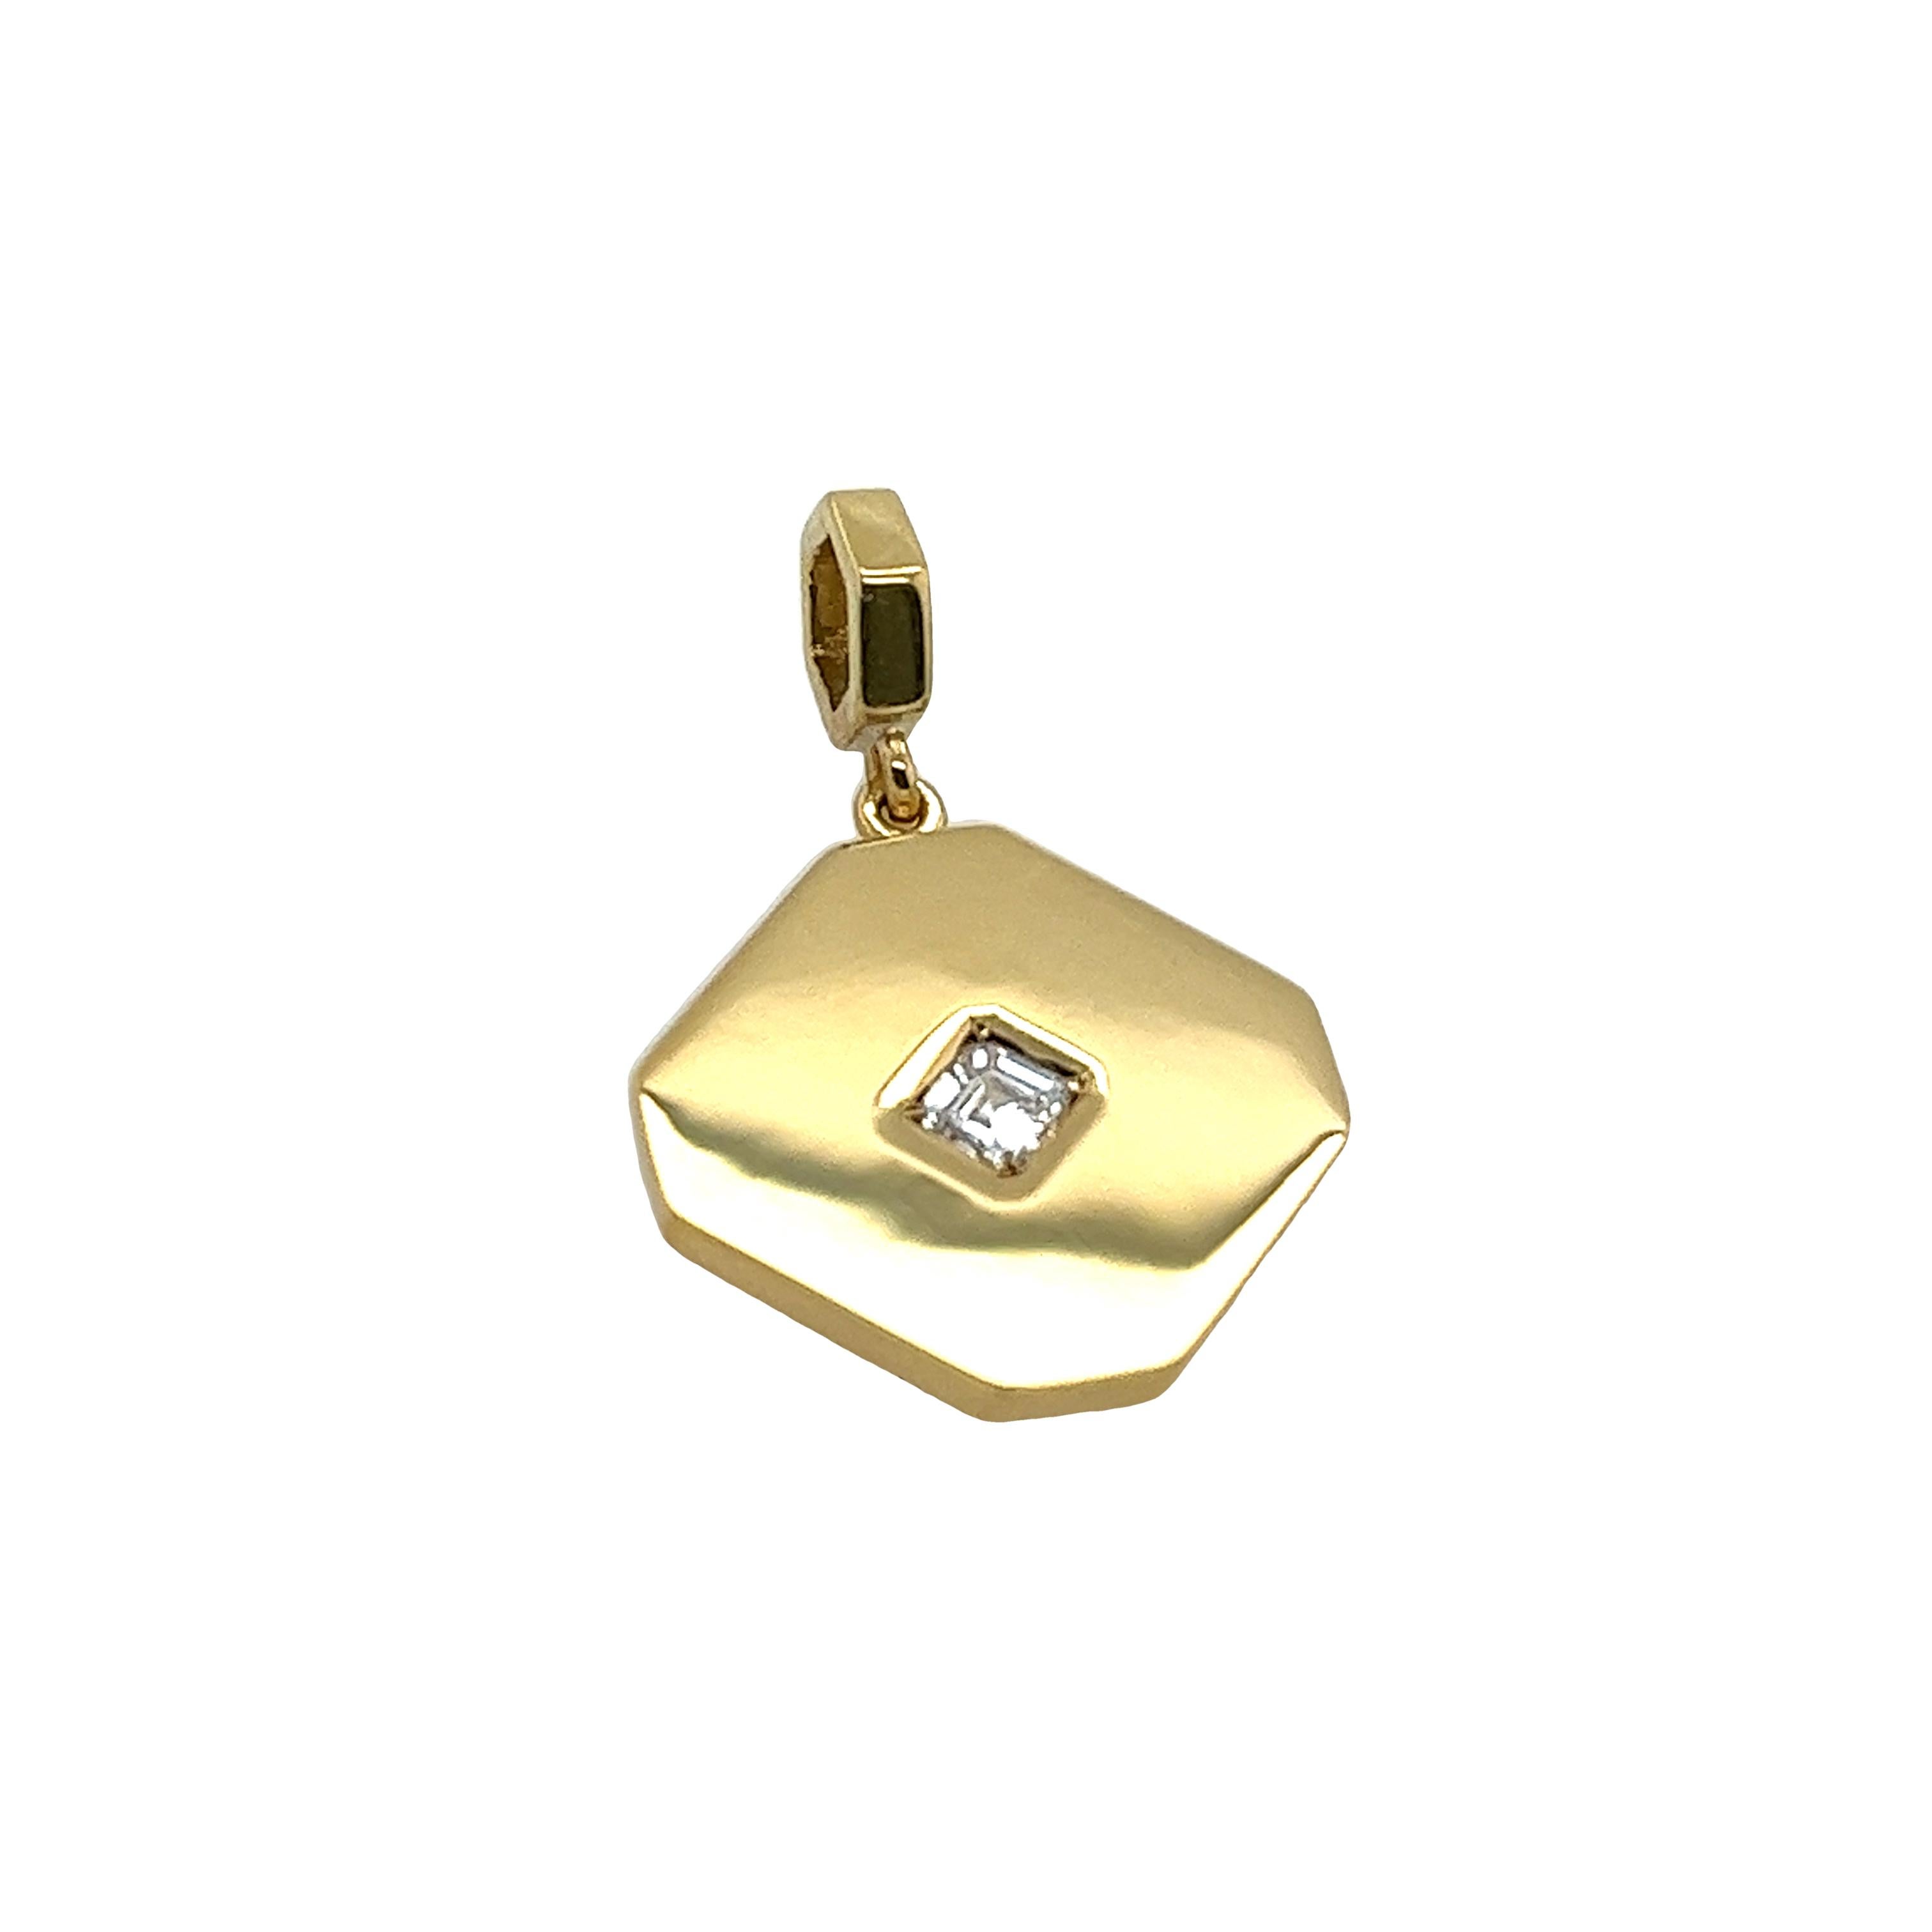 This gorgeous Tiffany & Co diamond pendant is set with an square natural diamond, 0.15ct in 18ct yellow gold setting.  Please note that this does not come with a chain. 

Item Size: 17.56mm x 17.65mm
Total weight: 5.74g
Total Diamond Weight: